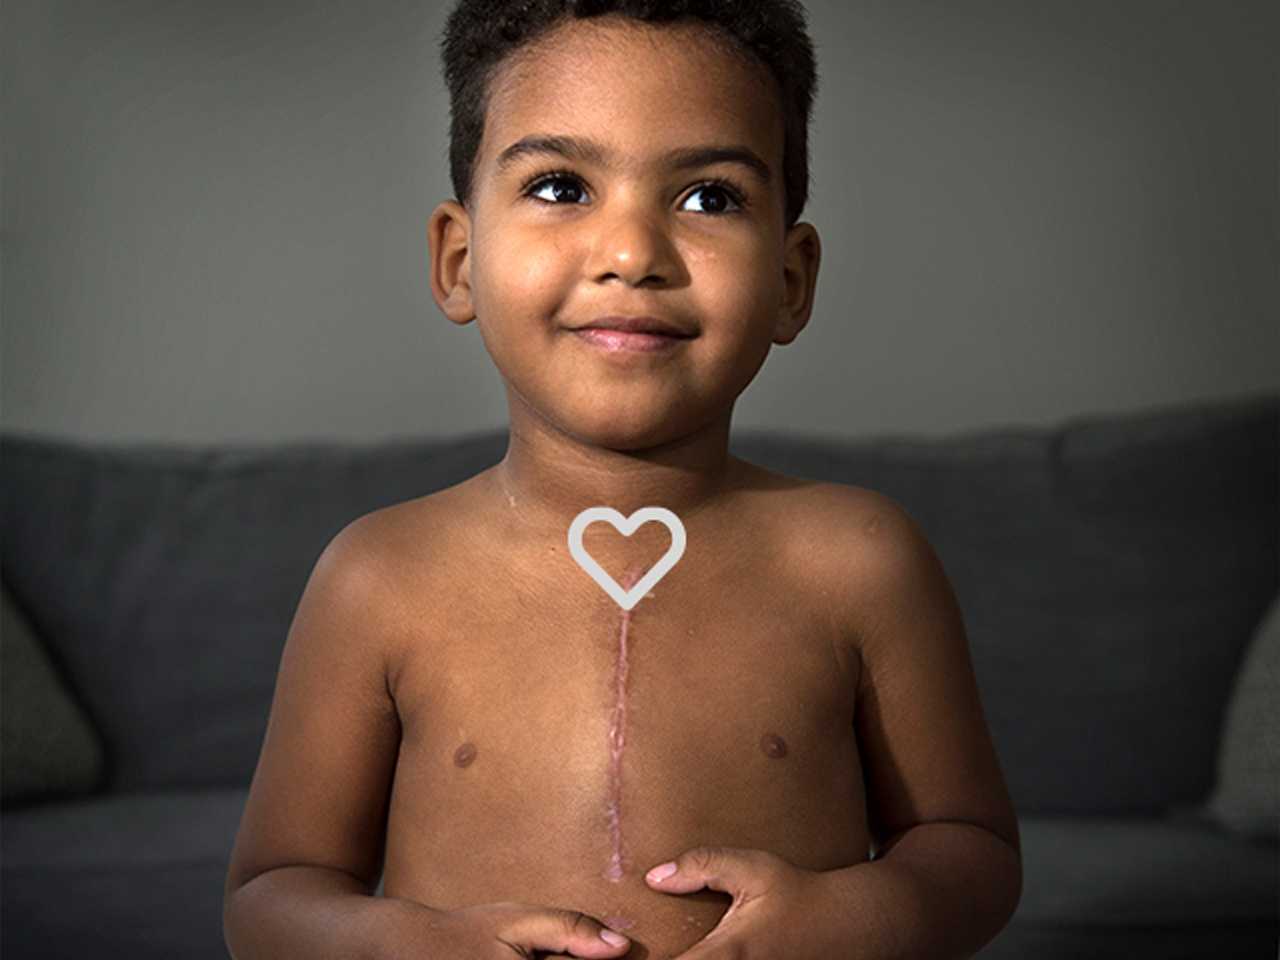 Young child with a scar on his chest